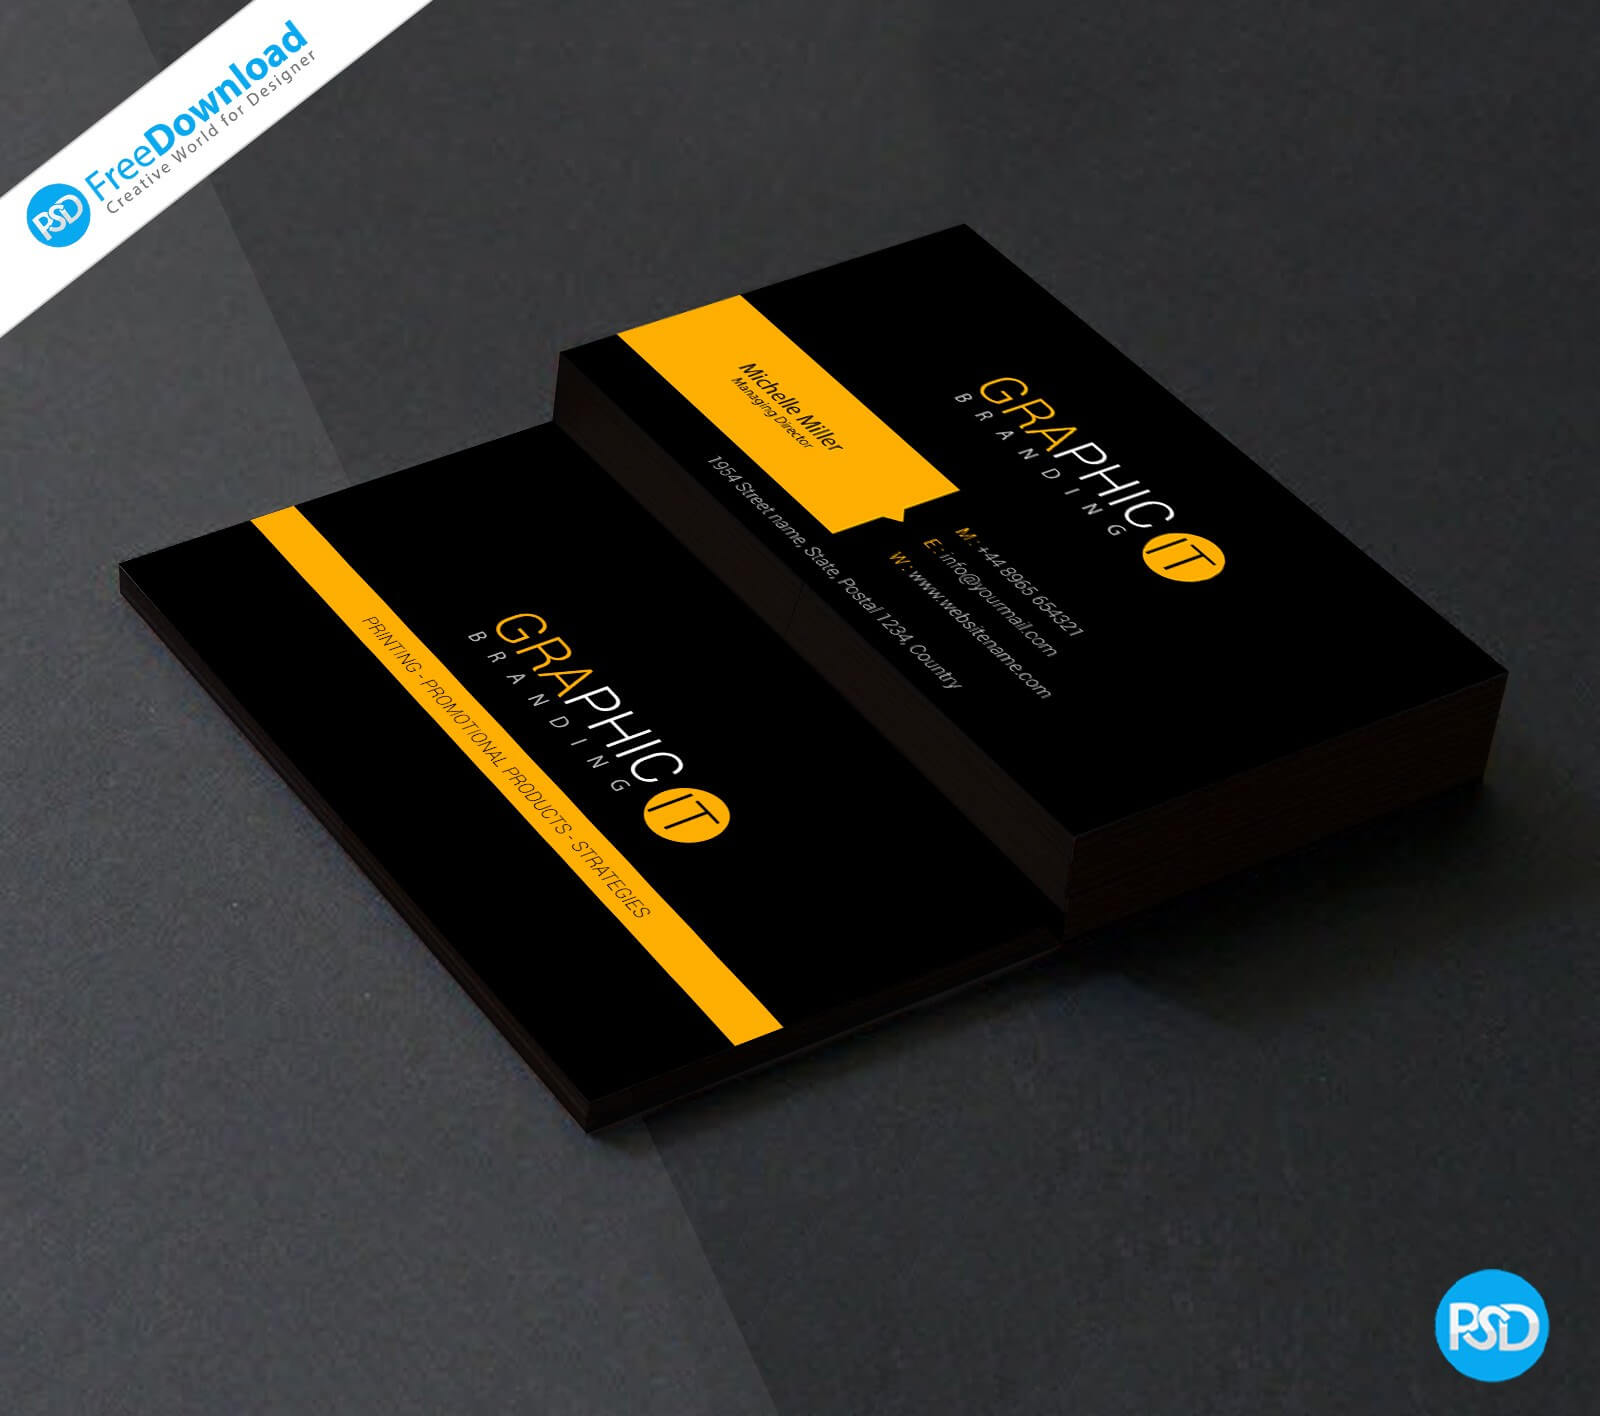 010 Blank Business Card Template Photoshop Free Download Intended For Professional Business Card Templates Free Download